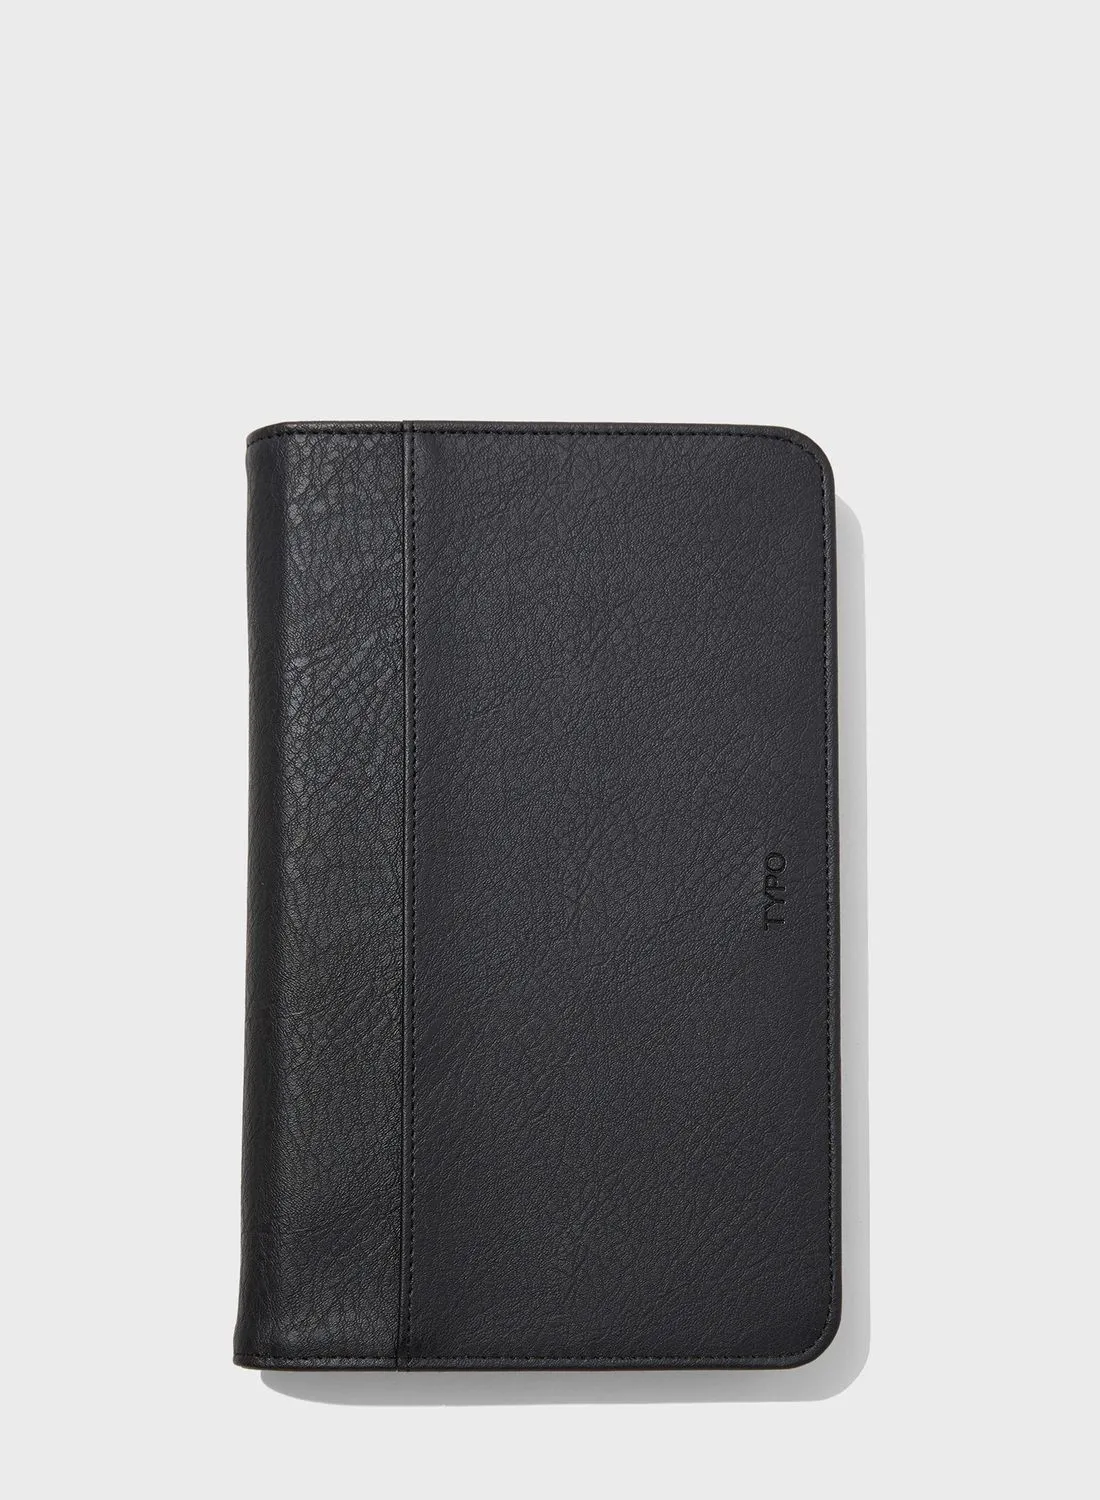 Typo Off The Grid Travel Wallet